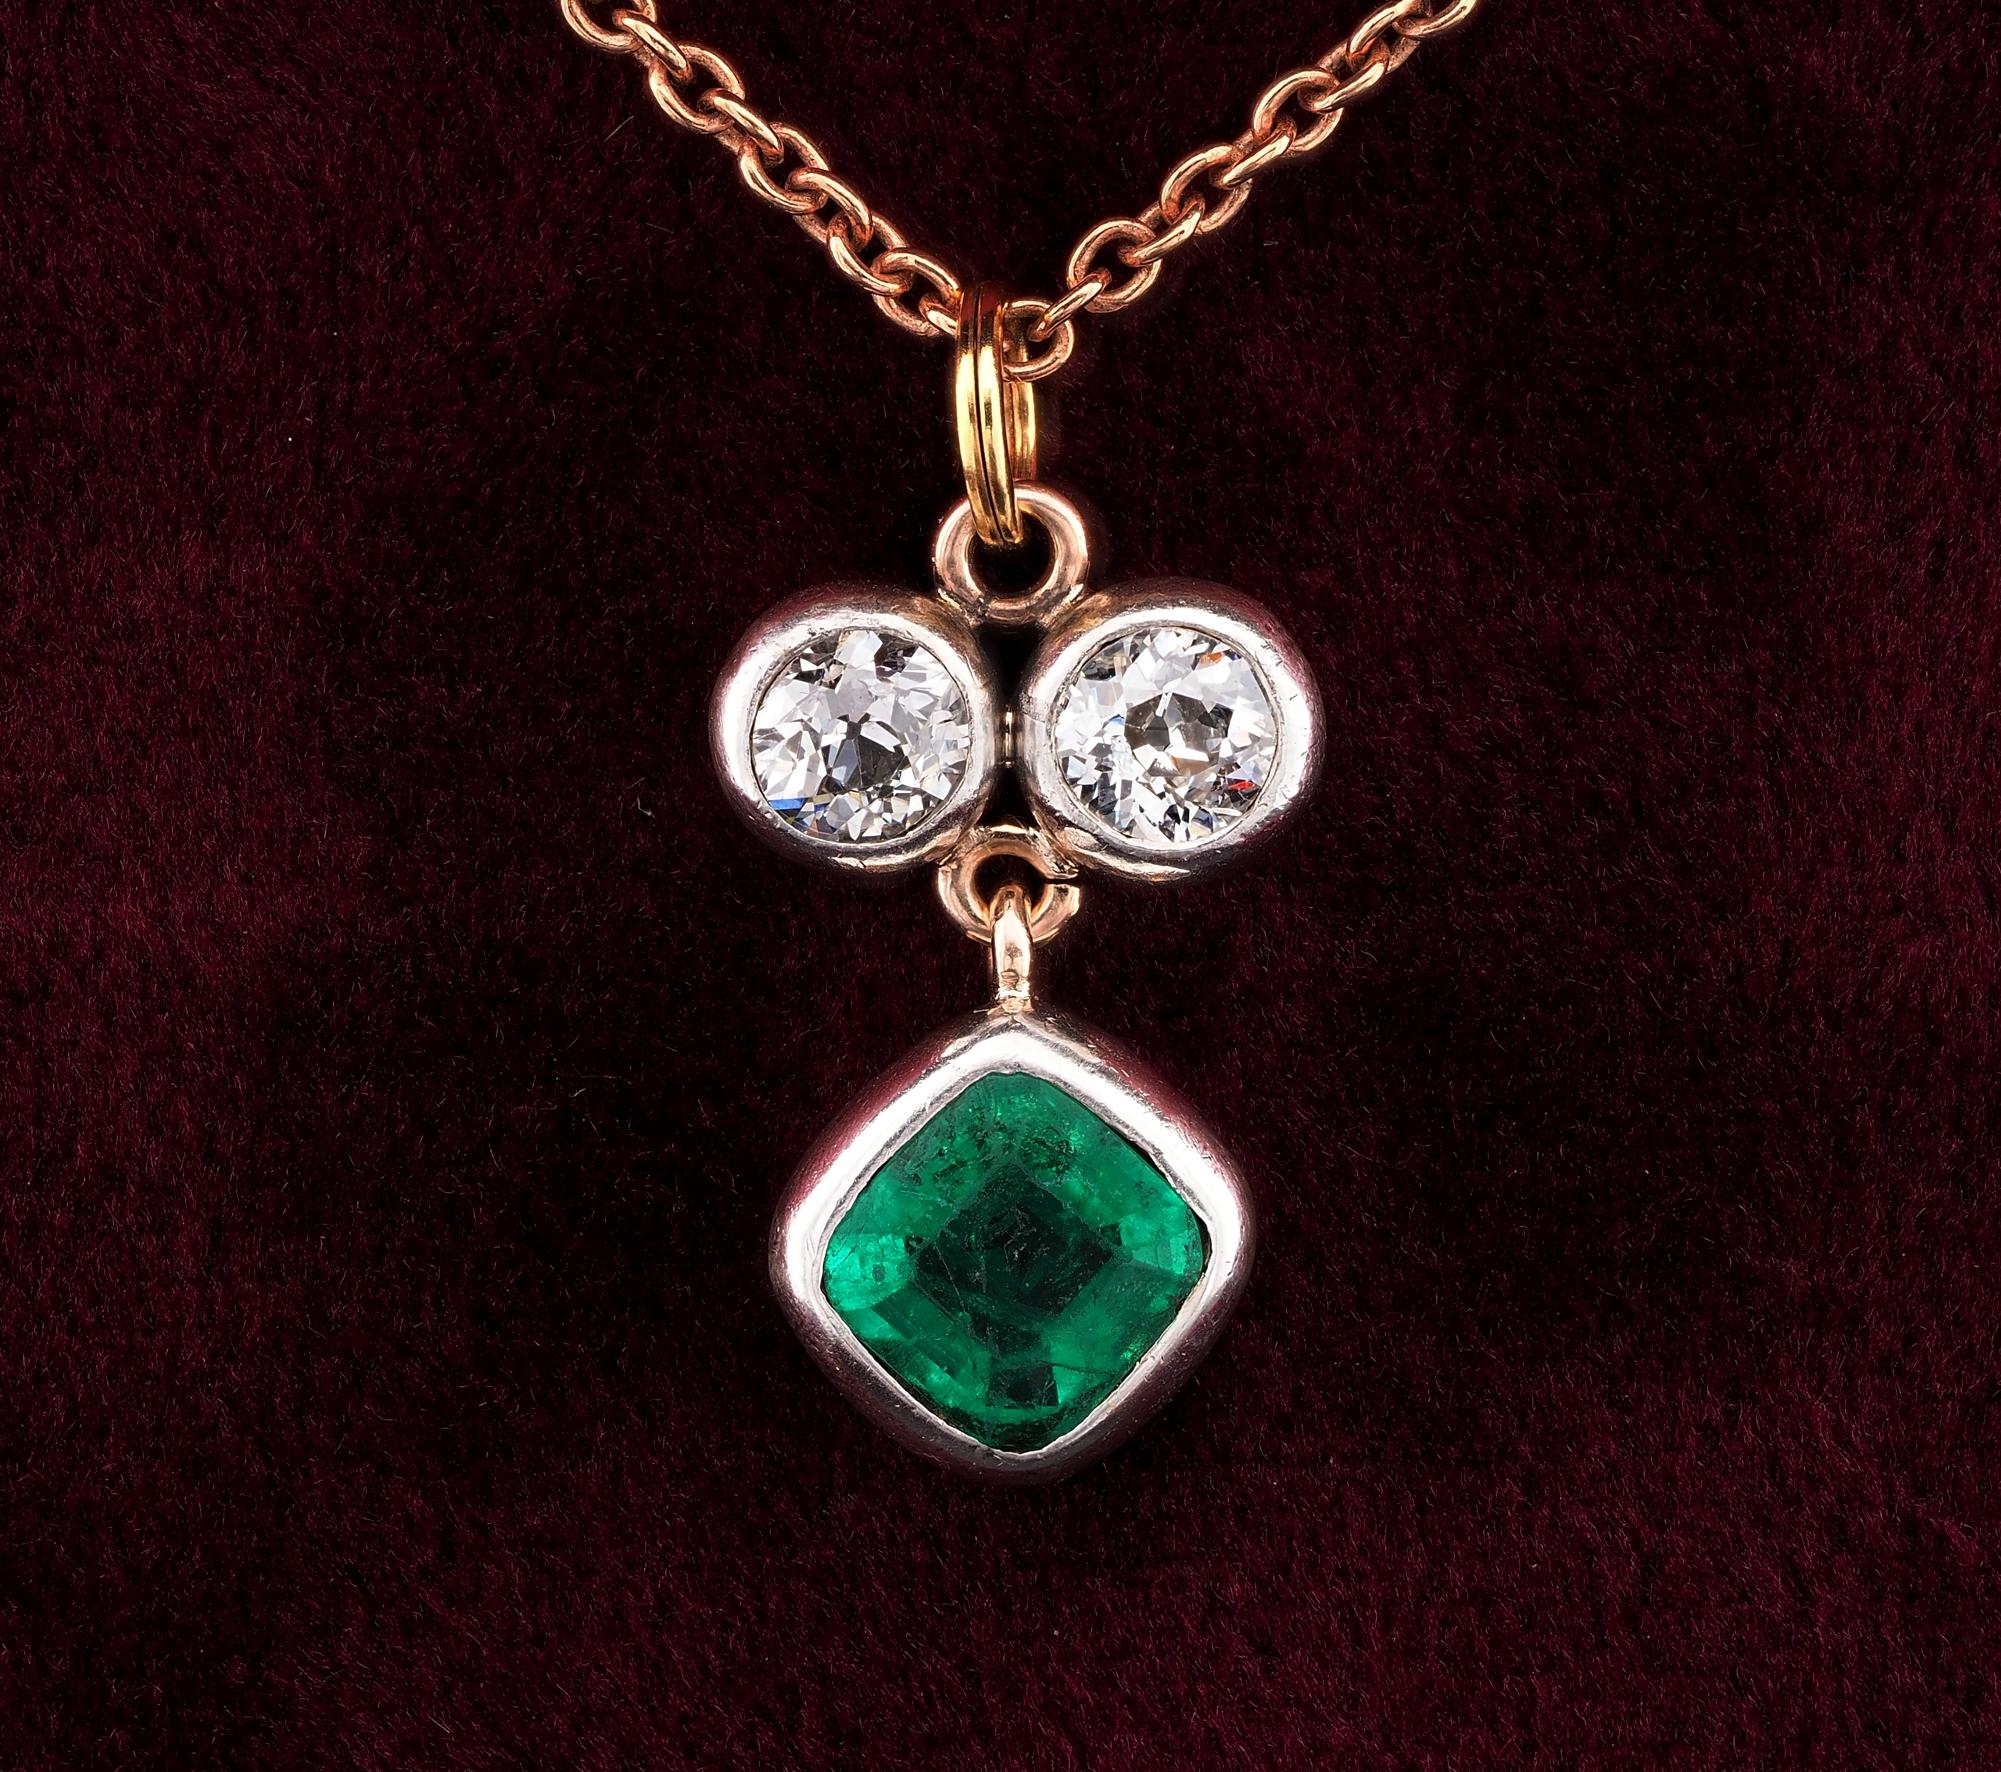 Victorian Marvel
This quite spectacular Victorian period pendant is composed by three stones, each individually collect set, 1880 ca
Gorgeously hand crafted in a trilogy version of solid 18 KT gold topped by silver
Set with a fine 1.15 Ct (6.6 x 6.3